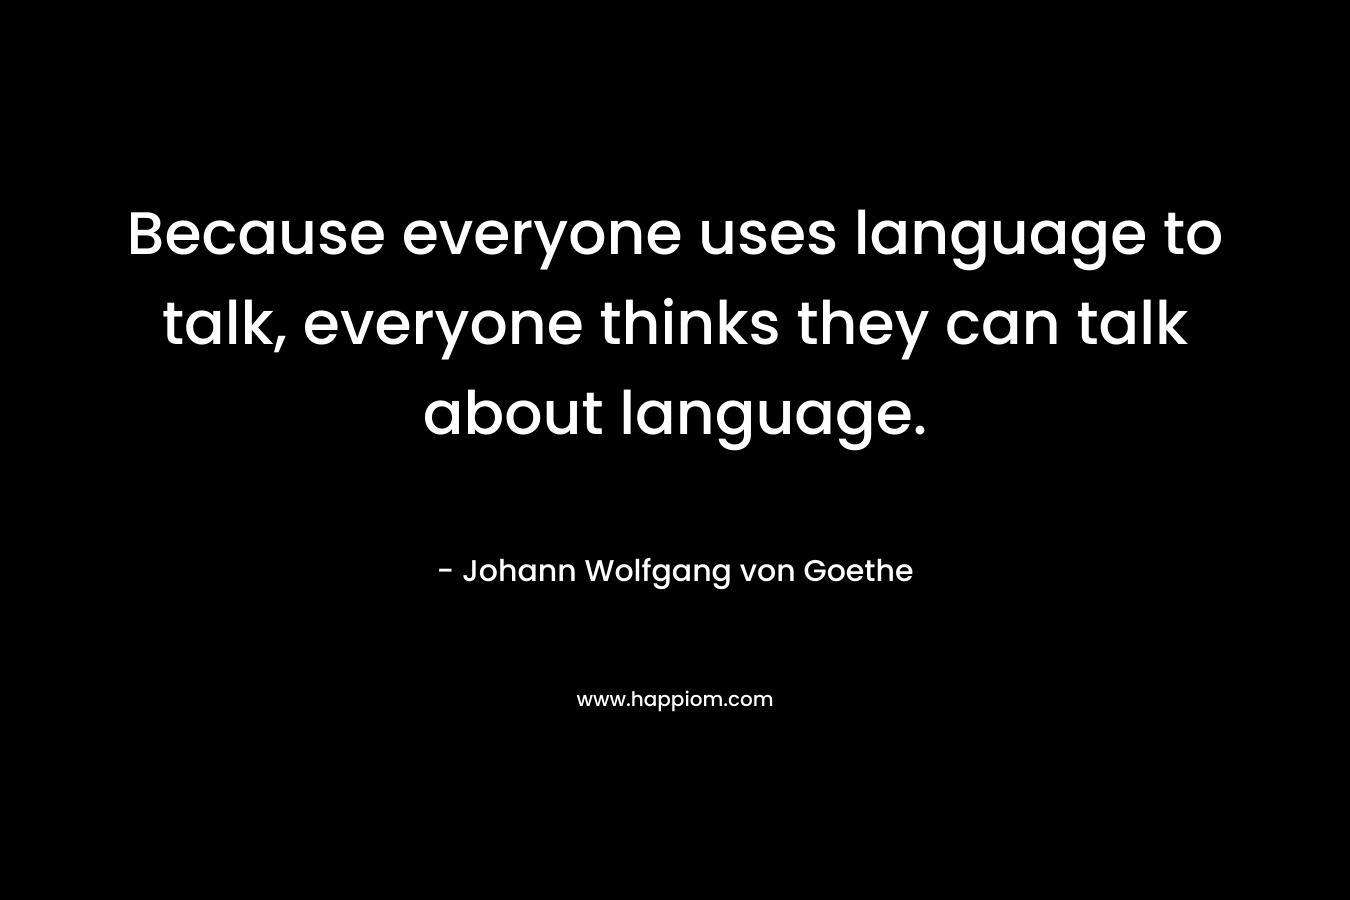 Because everyone uses language to talk, everyone thinks they can talk about language.